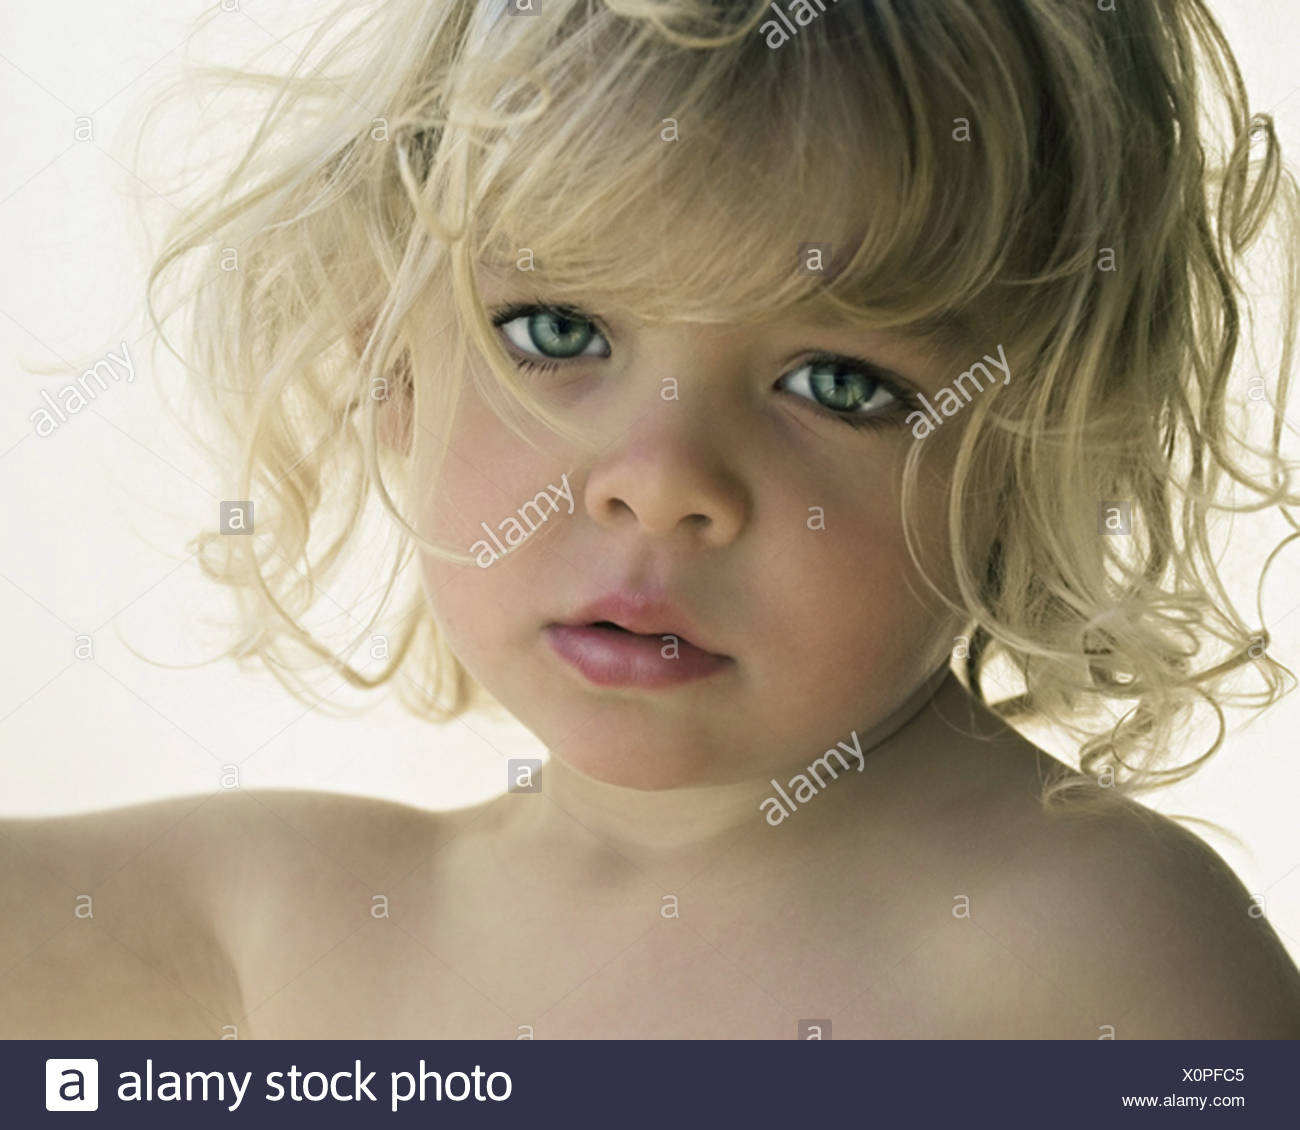 A Young Girl With Blonde Curly Hair And Blue Eyes Stock Photo